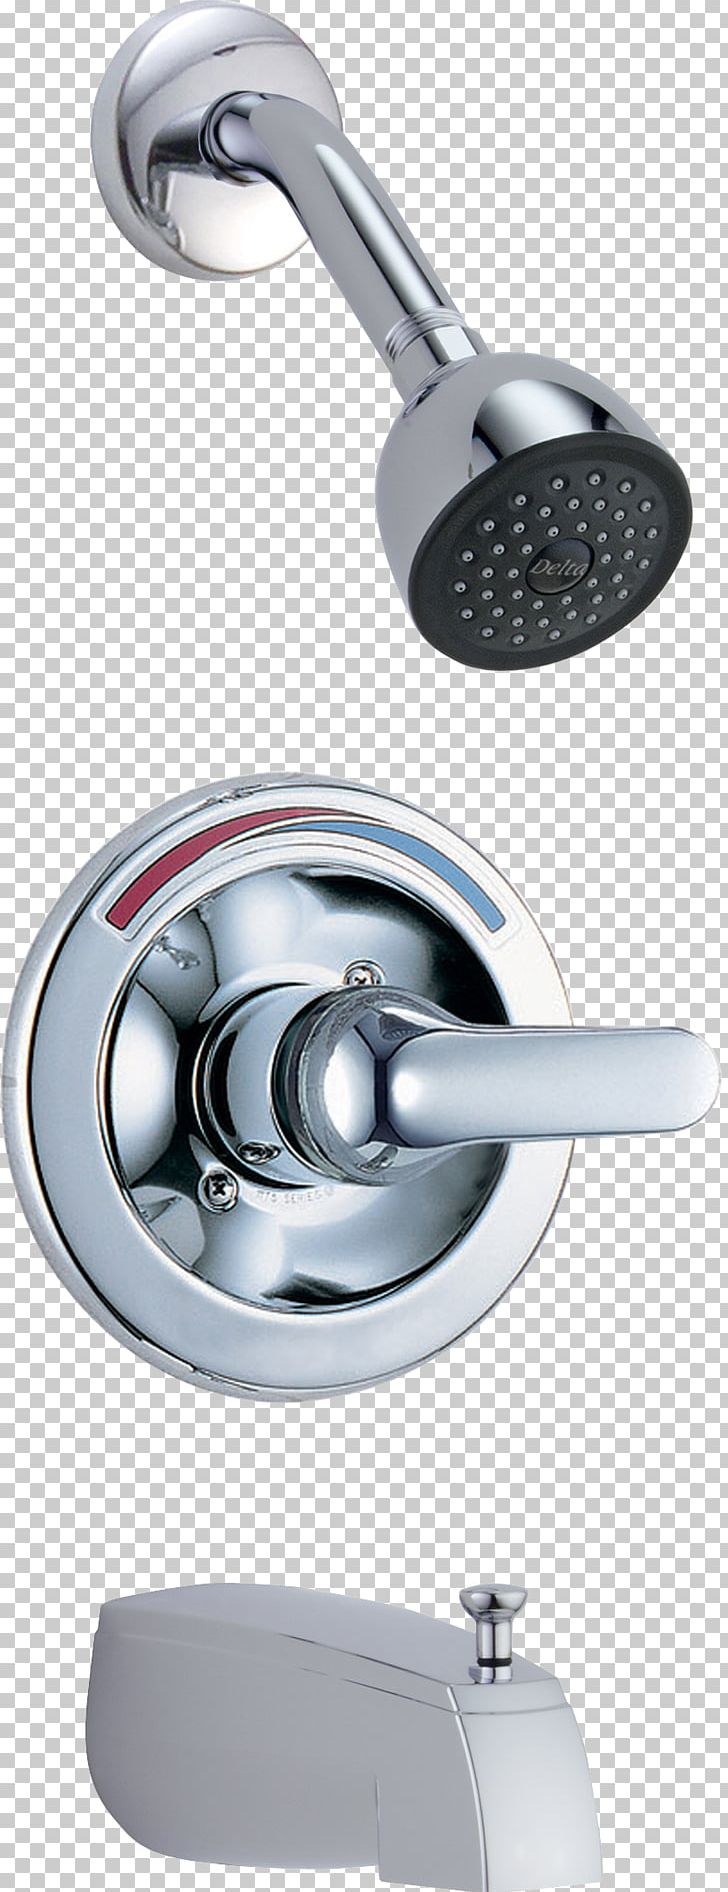 Shower Tap Pressure-balanced Valve Thermostatic Mixing Valve PNG, Clipart, Angle, Bathroom, Bathtub, Brass, Chrome Plating Free PNG Download